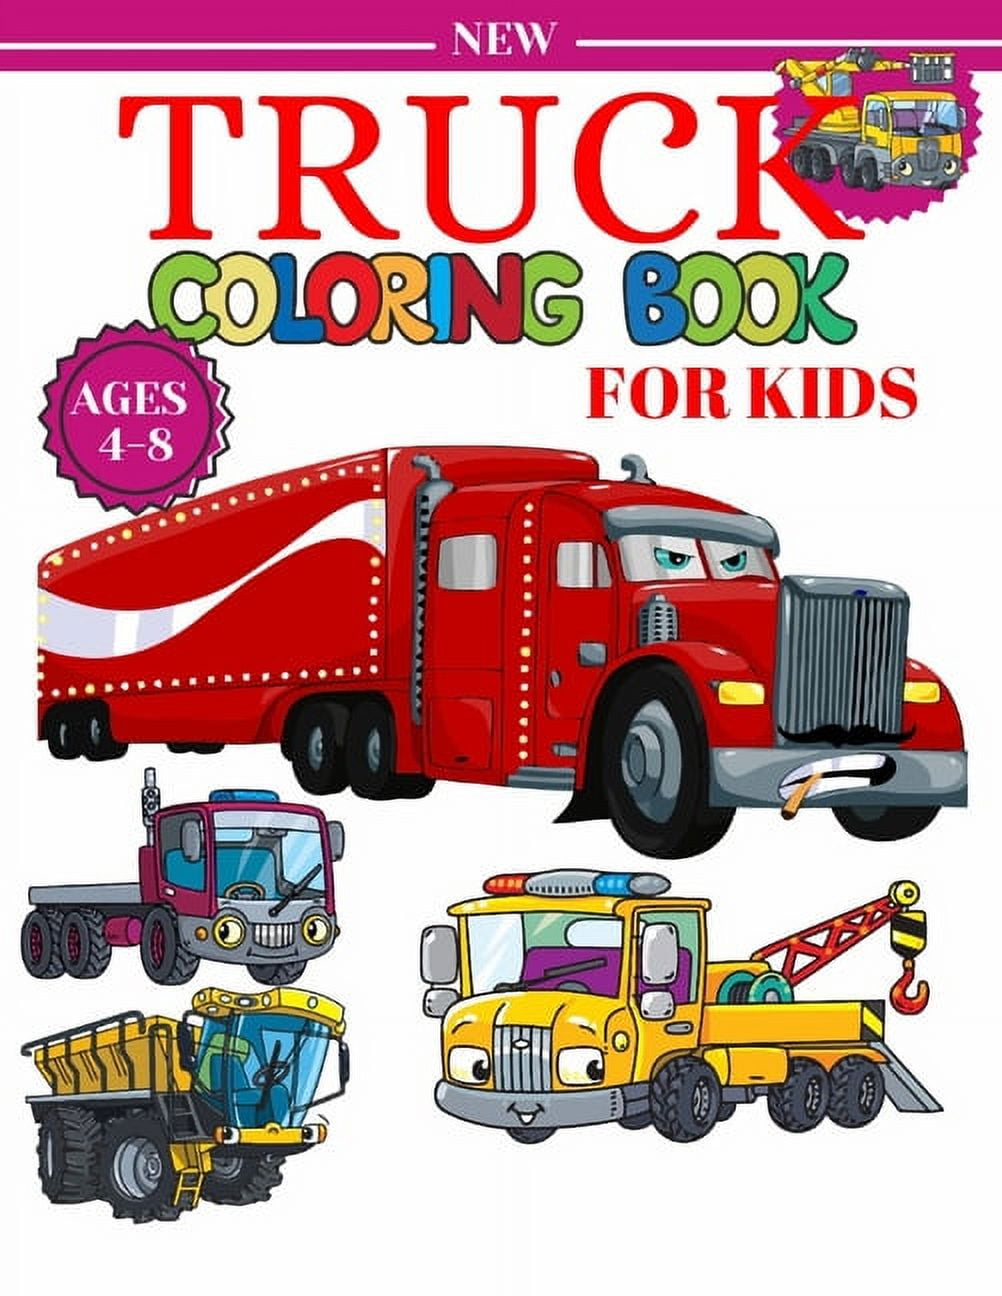 Big Construction Truck Coloring Book for Kids Ages 4-8: Activity Book for  Kids, Toddlers, Boys Trucks, Excavators, Crane, Concrete Mixer, Forklift  and (Paperback)